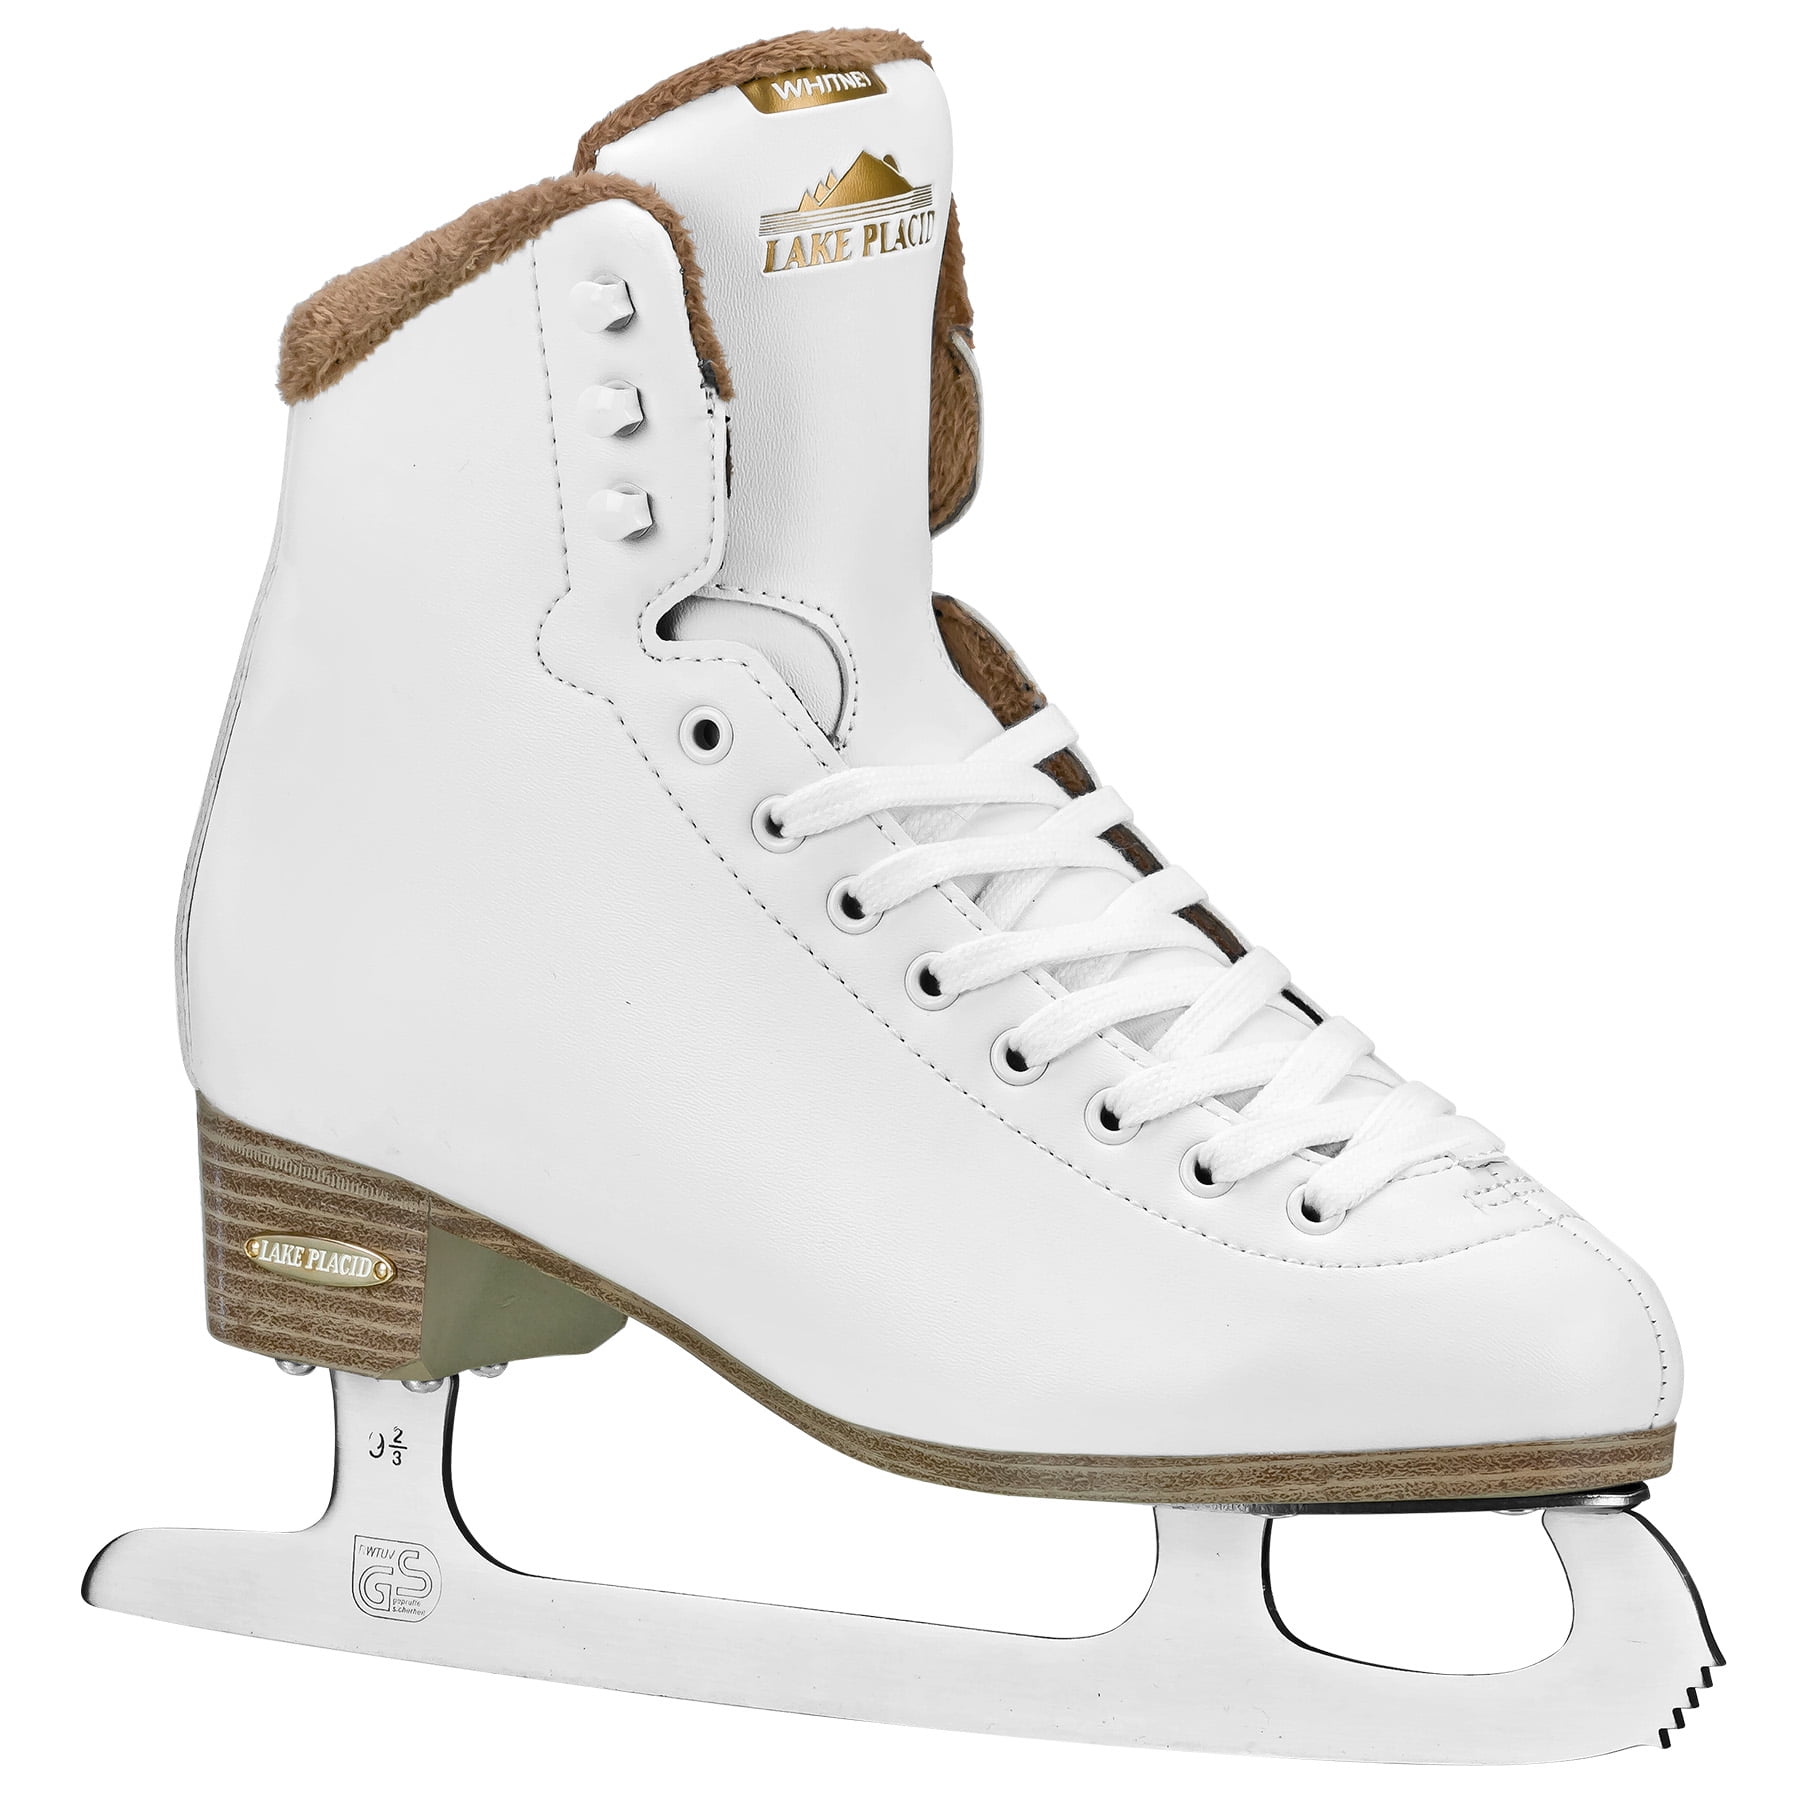 New Lake Placid Cascade Women's Figure Ice Skates Size 7 White/Gold Accent 